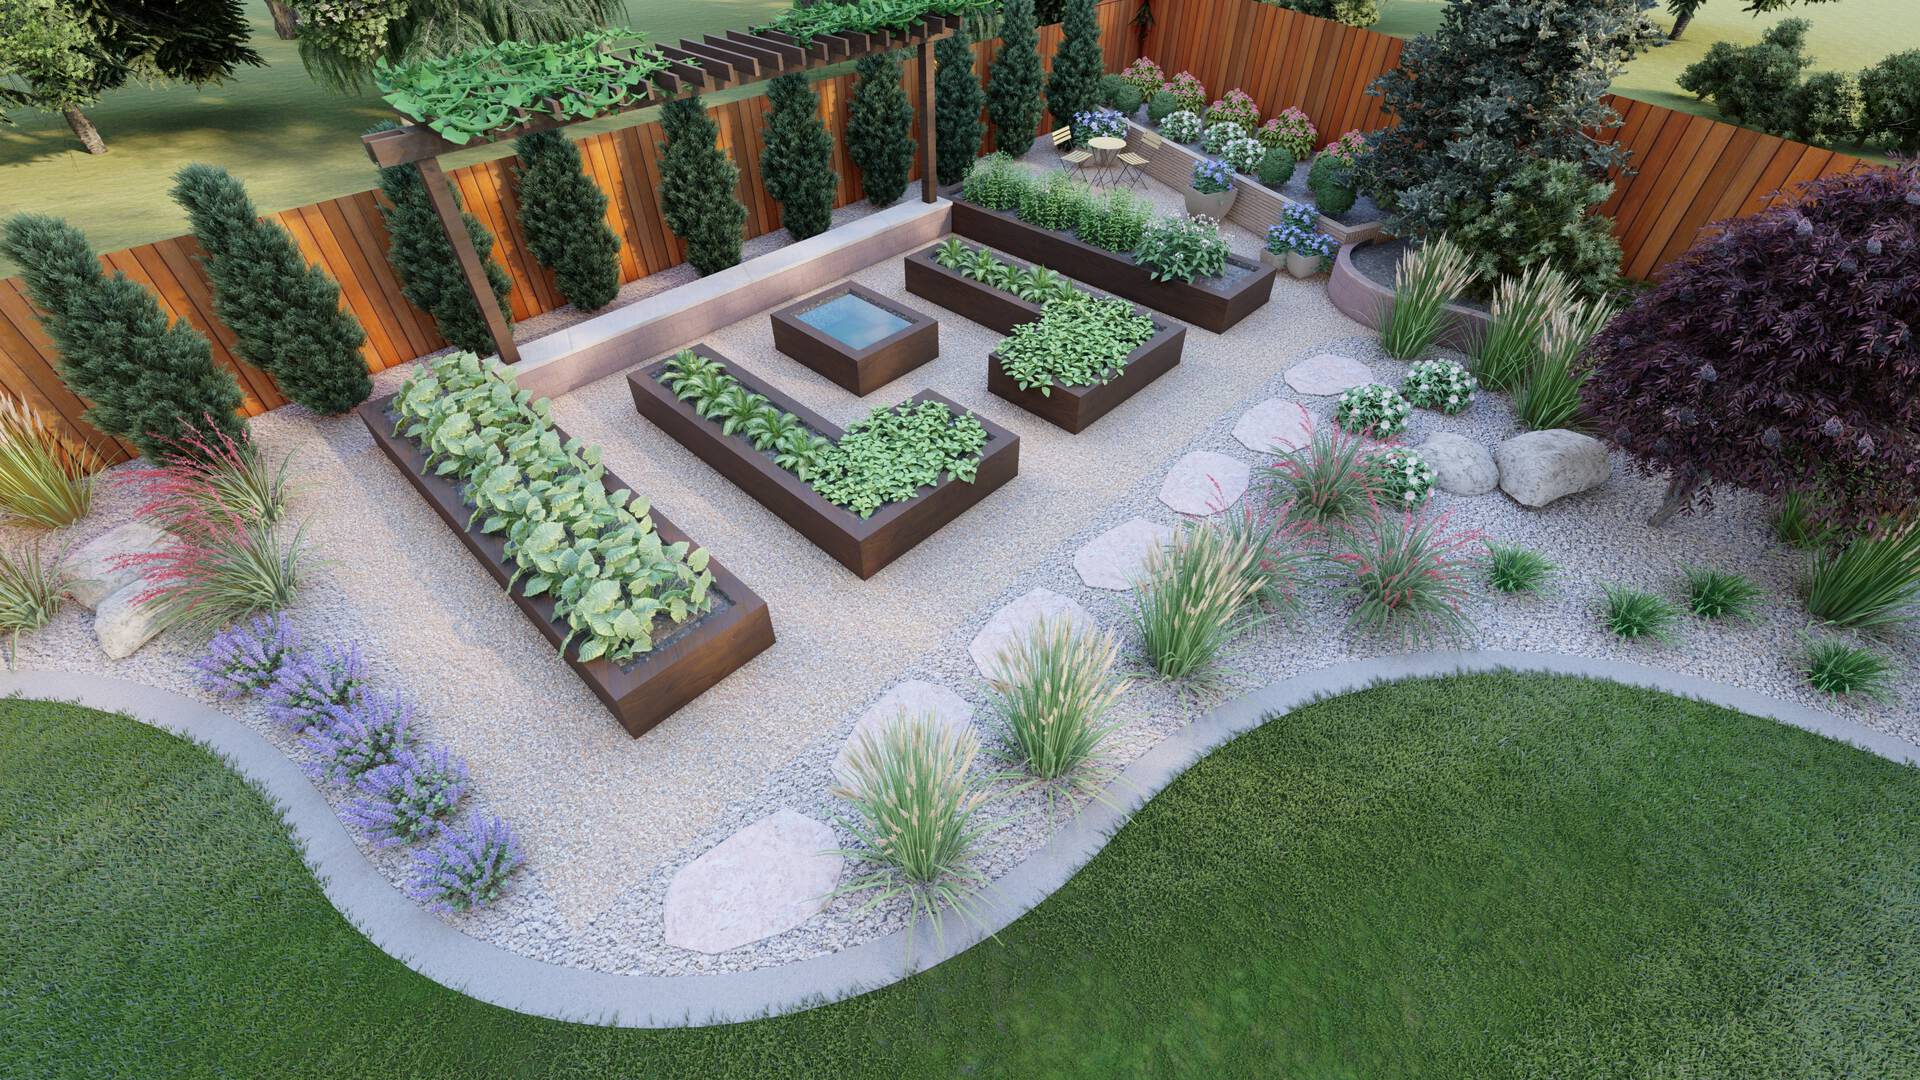 backyard landscaping ideas in Denver for container gardens with emerald green arborvitae as a privacy wall